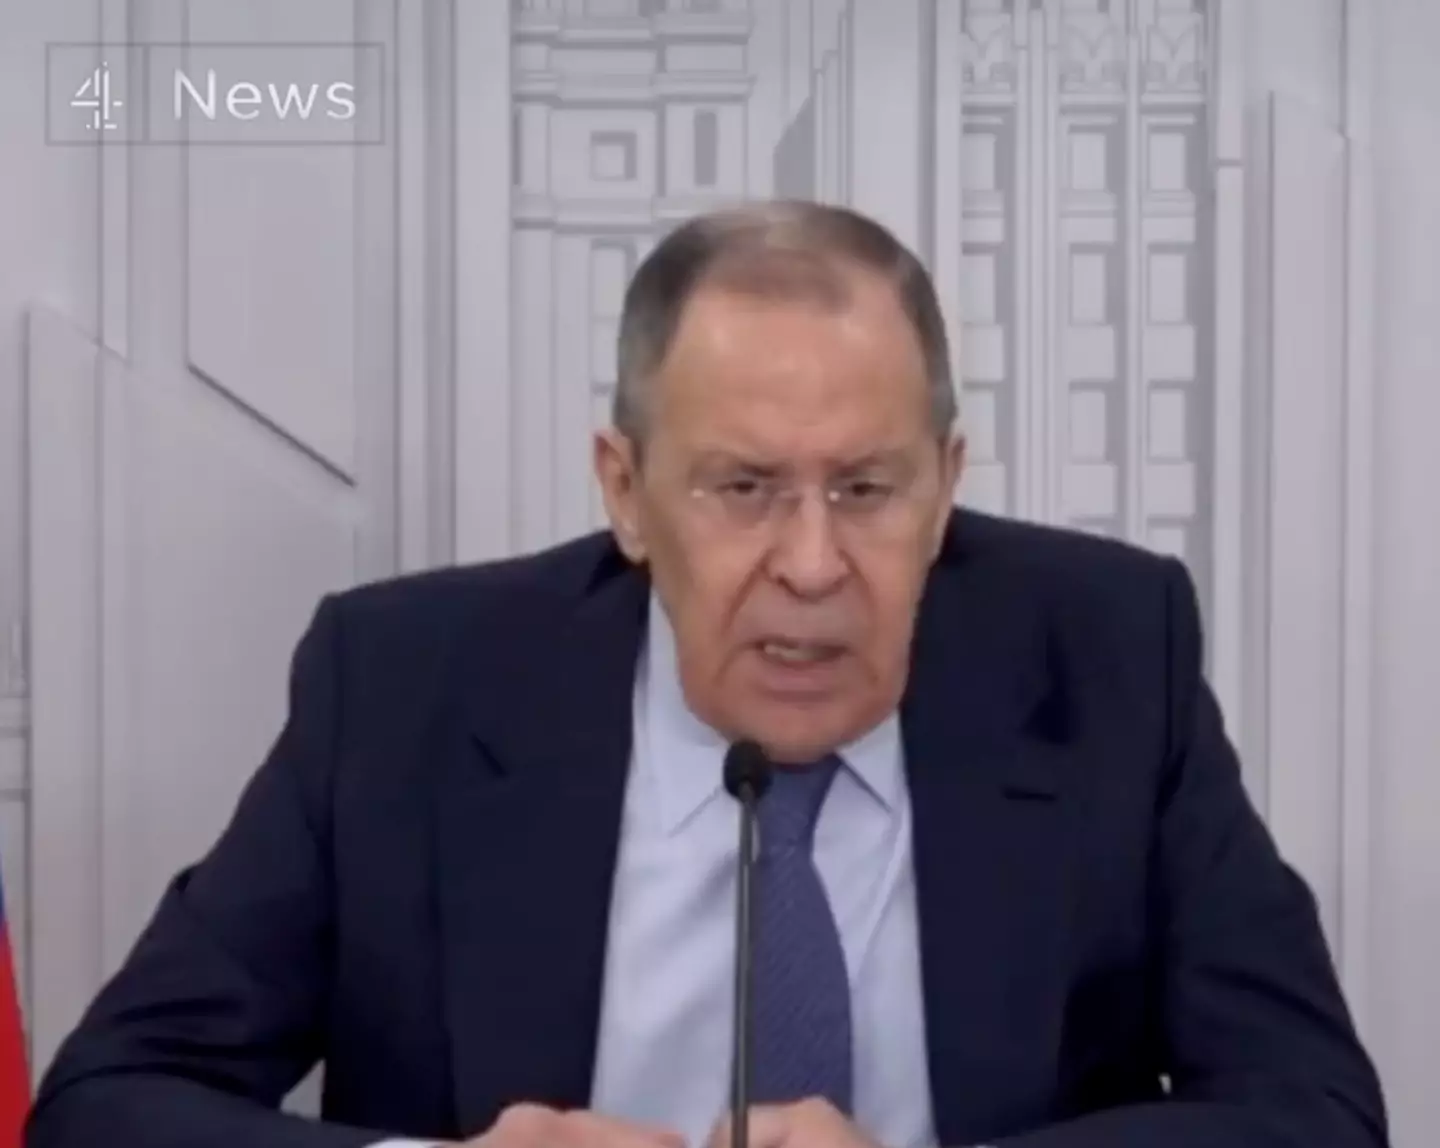 The Russian Foreign Minister was disparaging (